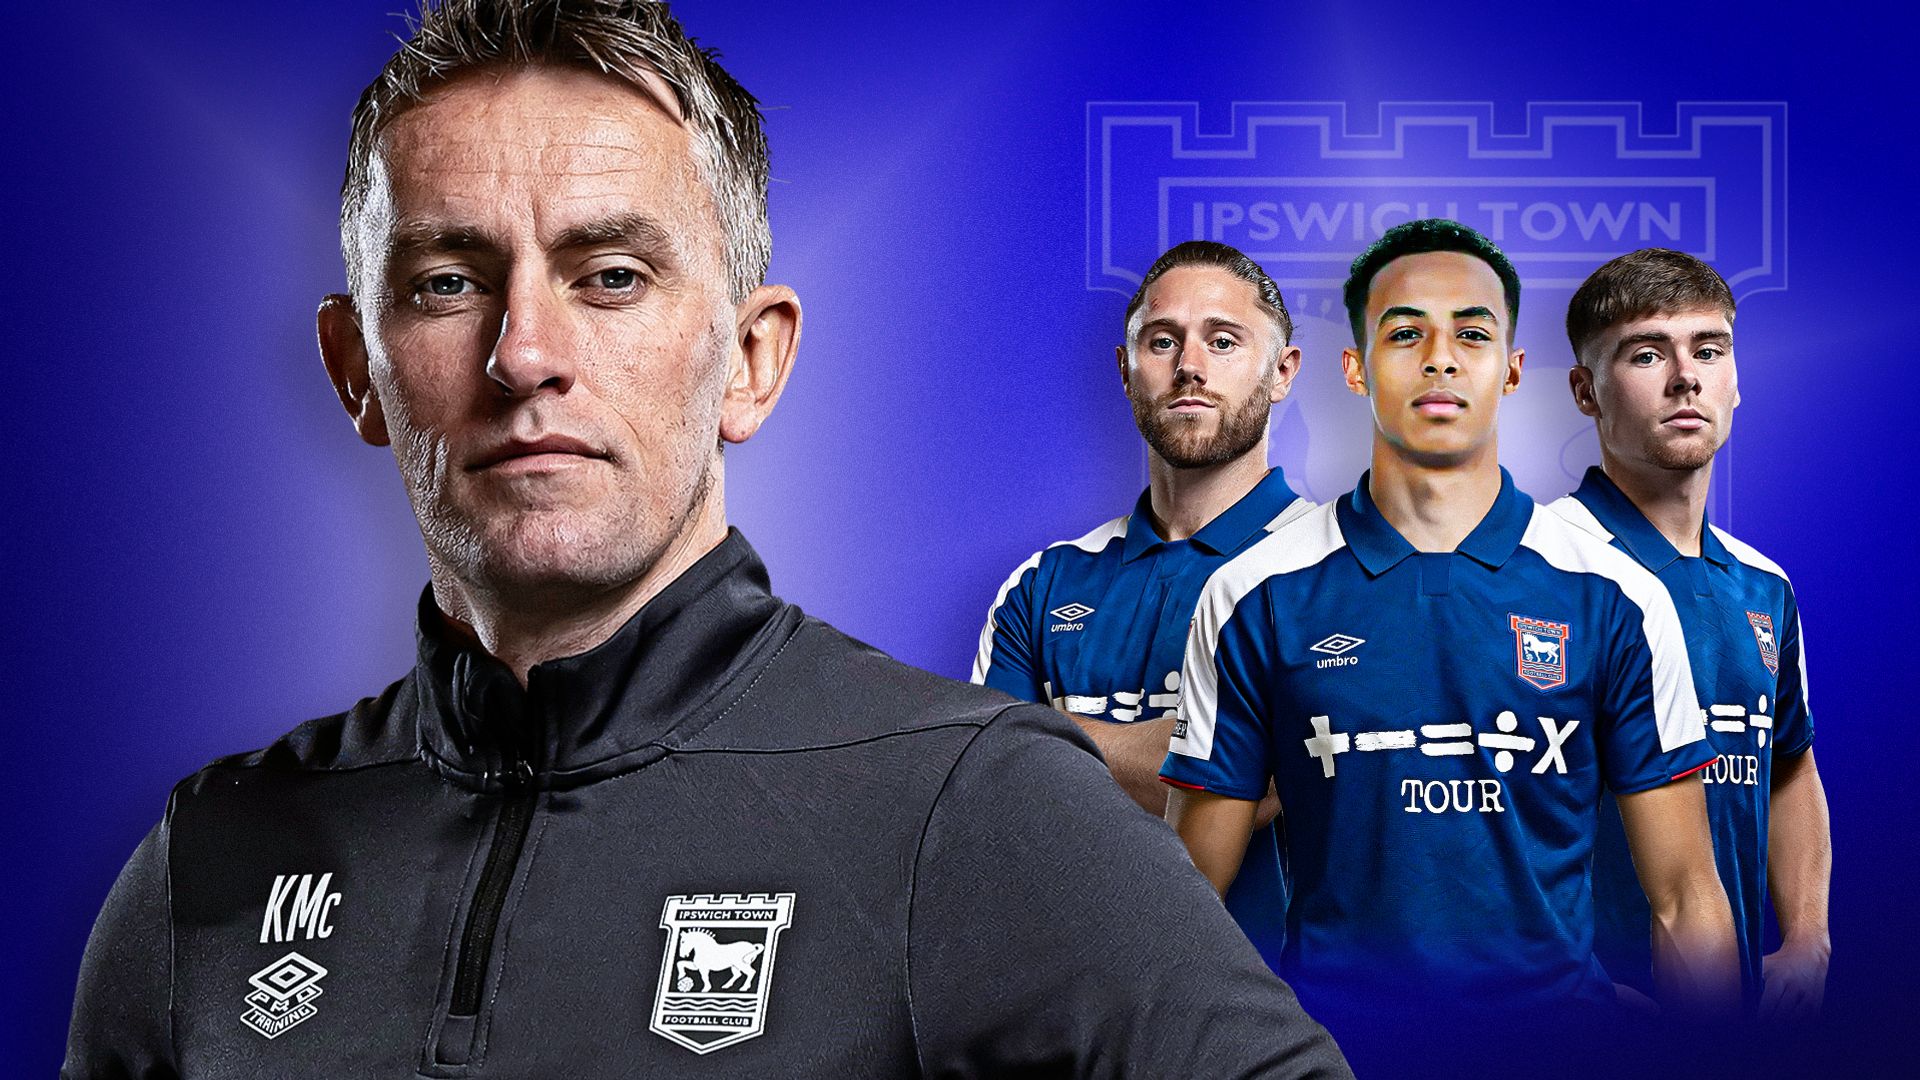 Ipswich's 'incredible coach' McKenna - In the words of his players